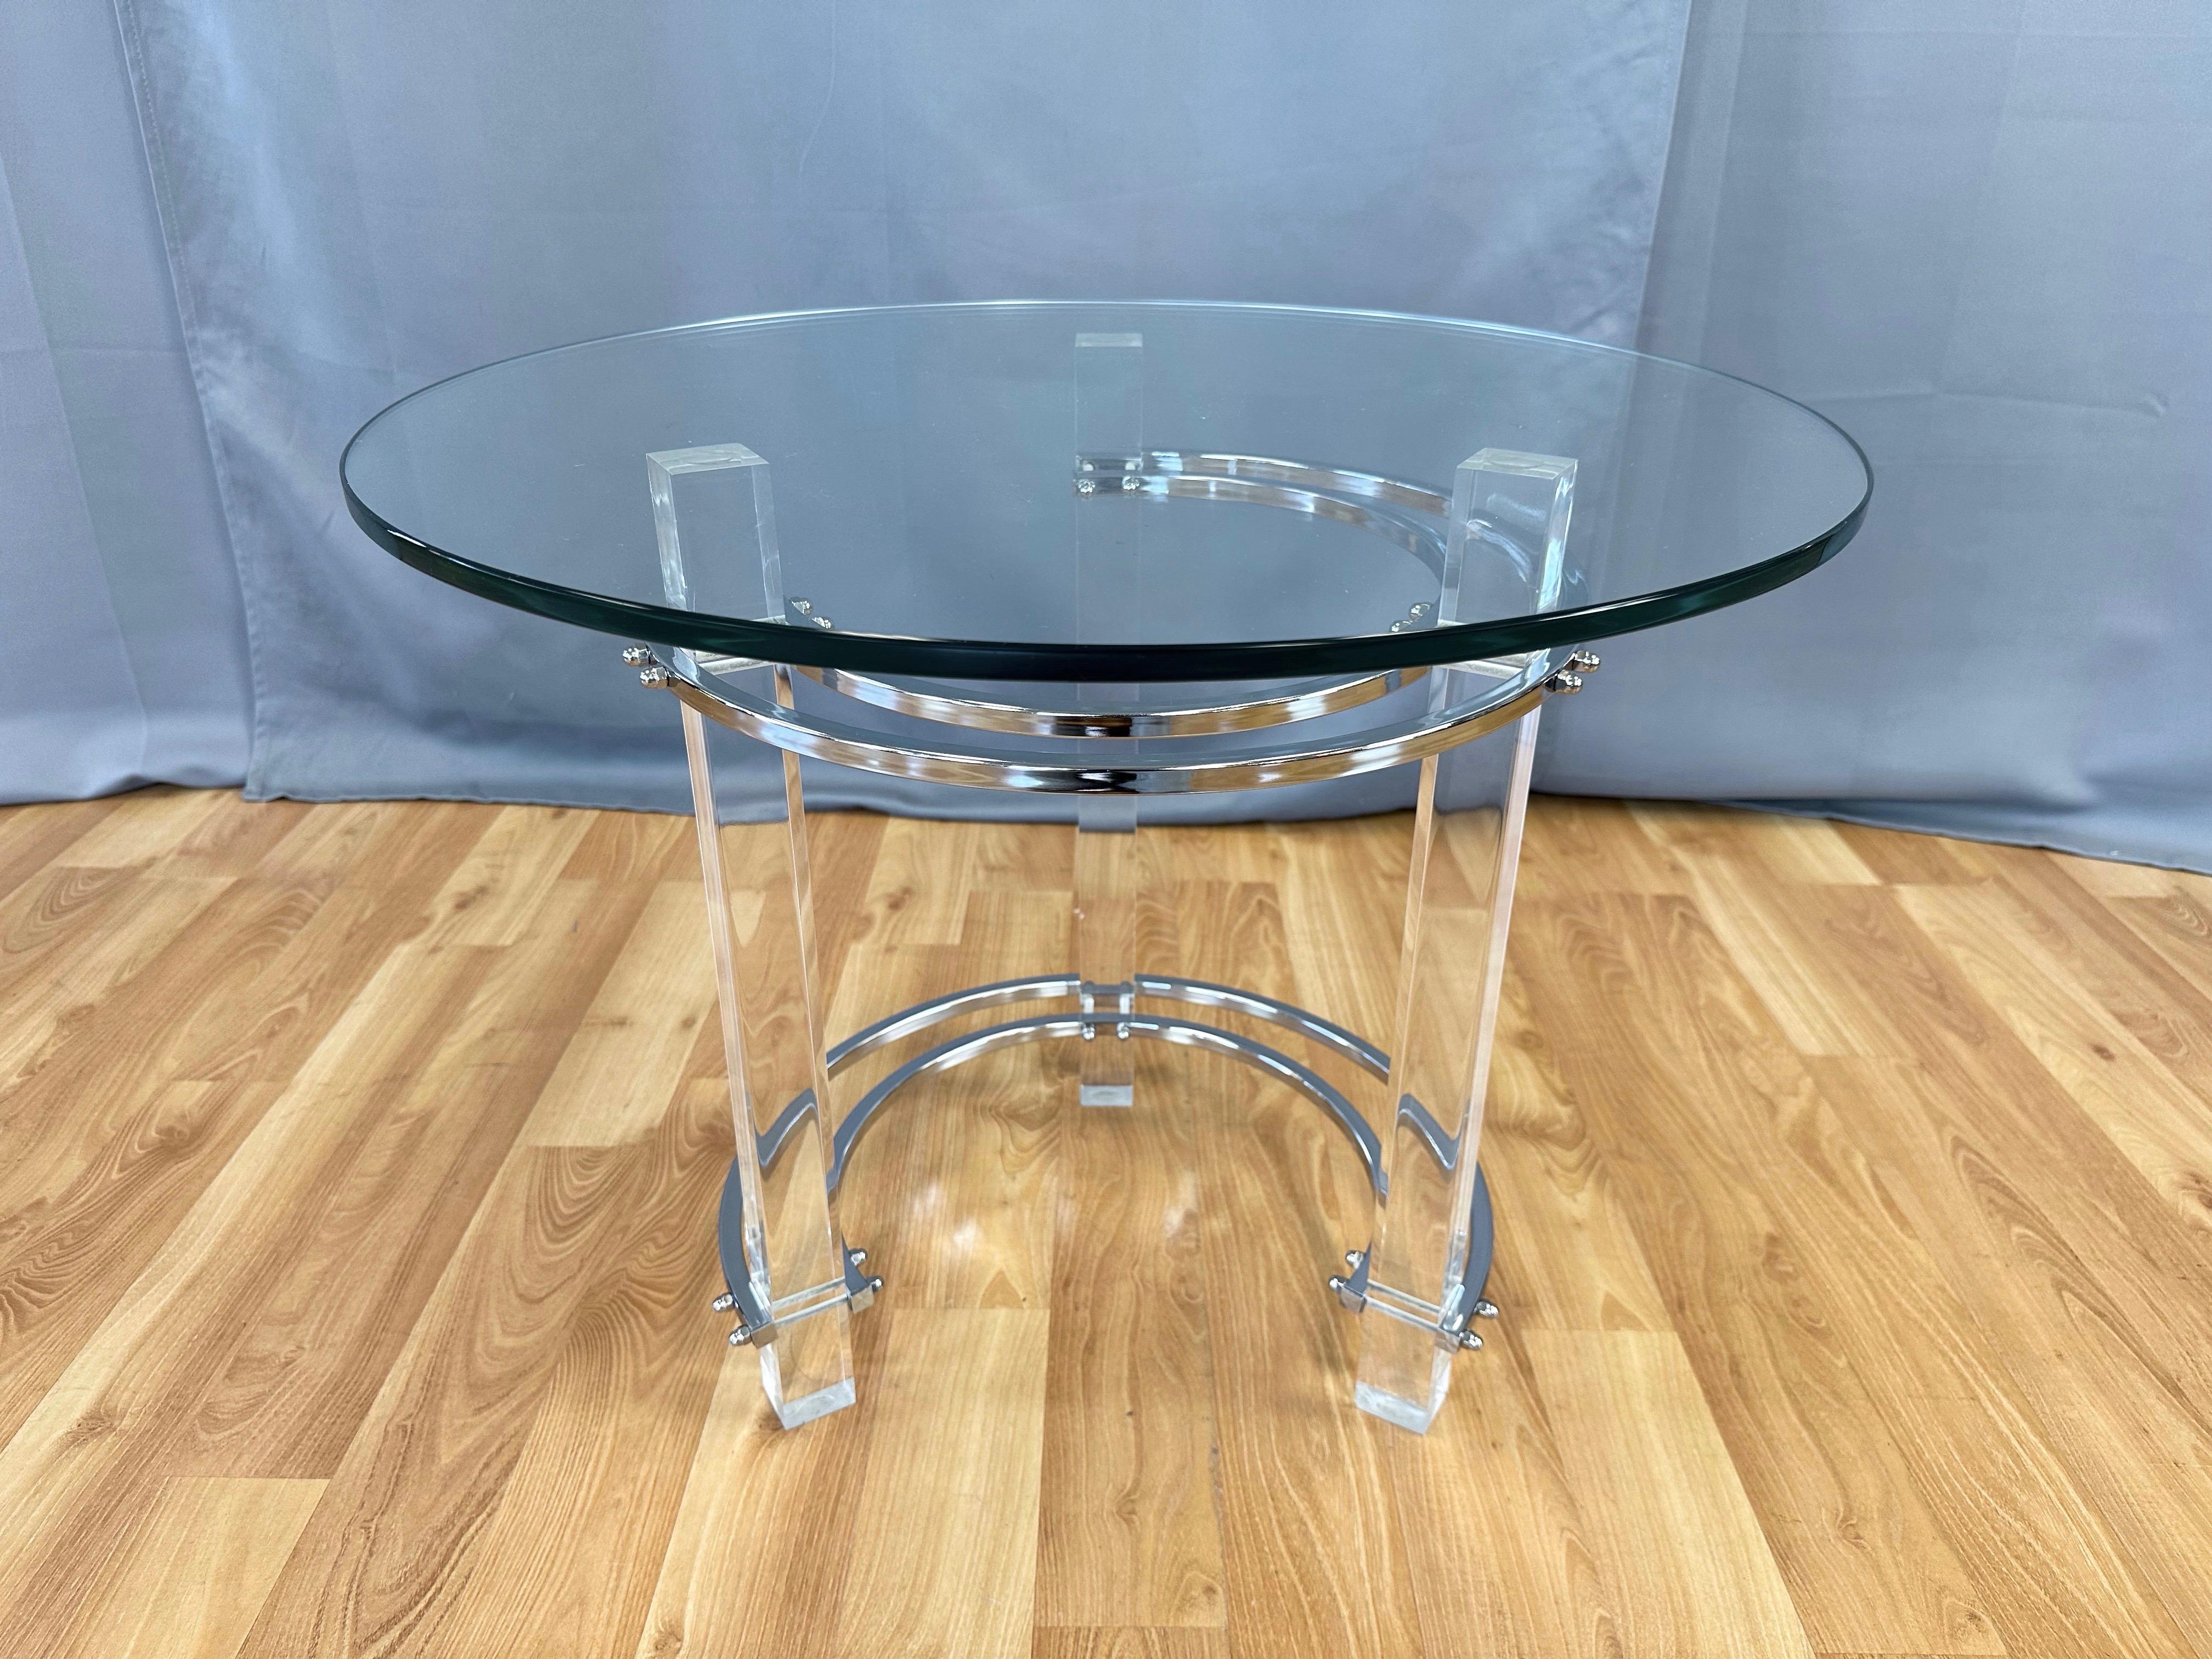 Polished Charles Hollis Jones Lucite and Chrome Circular Side Table or End Table, 1970s For Sale